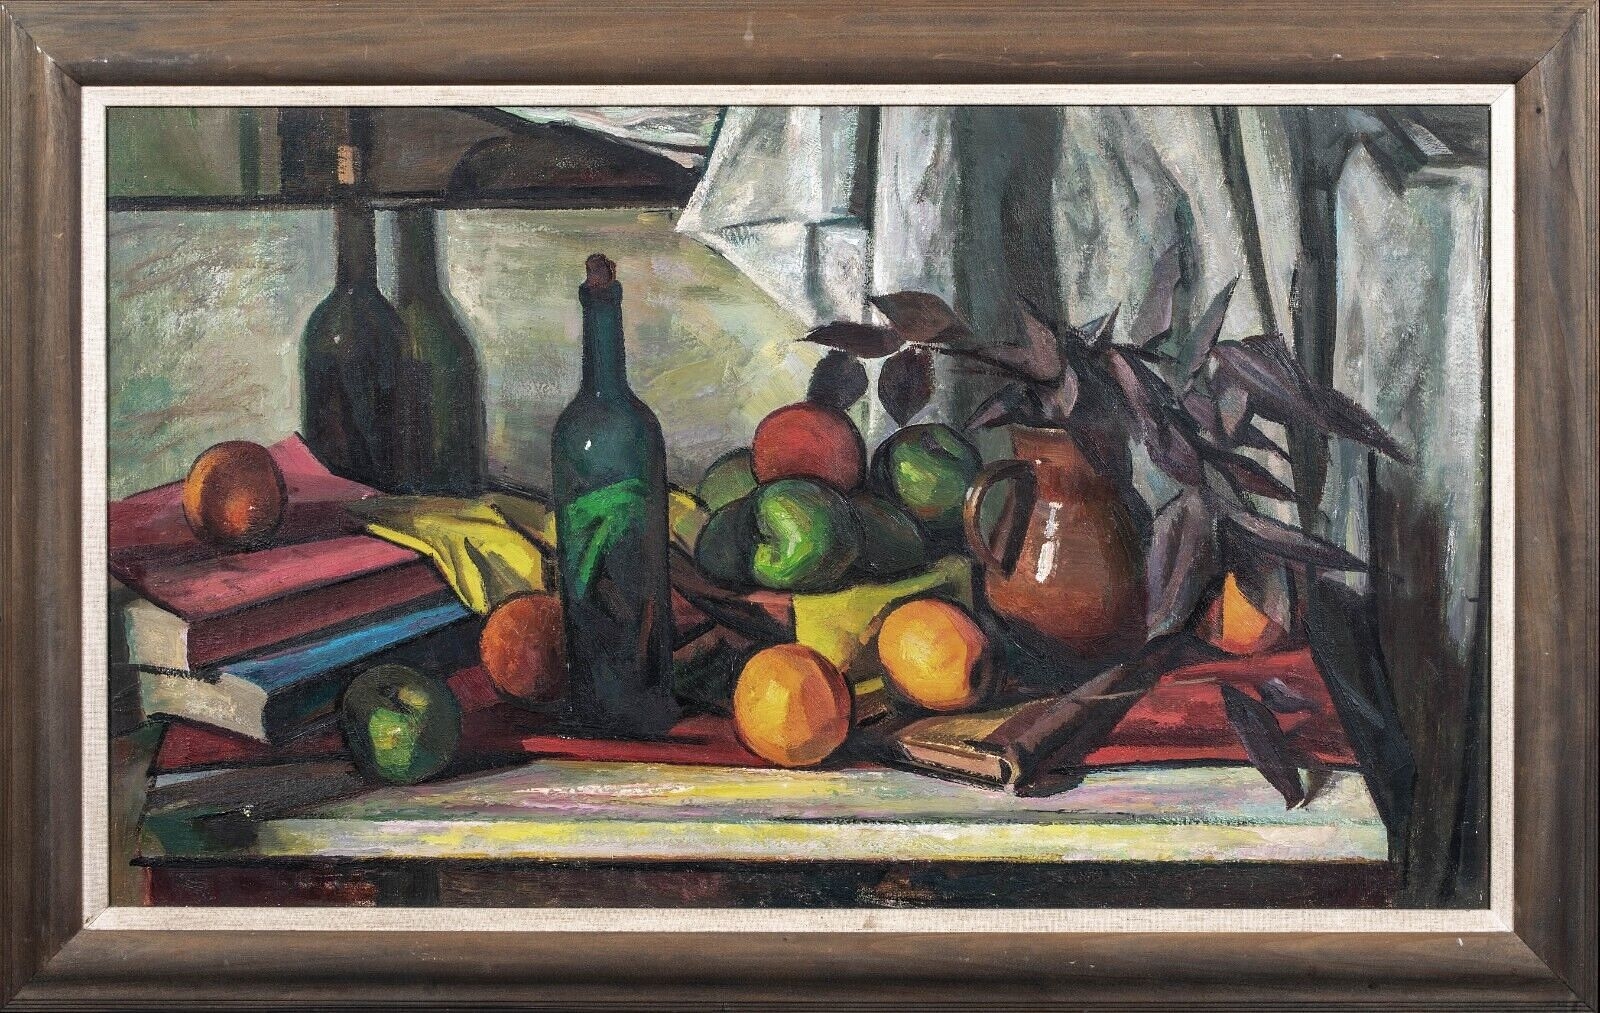 Artwork by Paul Cézanne, STILL LIFE OF BOOKS, BOTTLES AND FRUITS OIL PAINTING, Made of painted in oil on artists' board